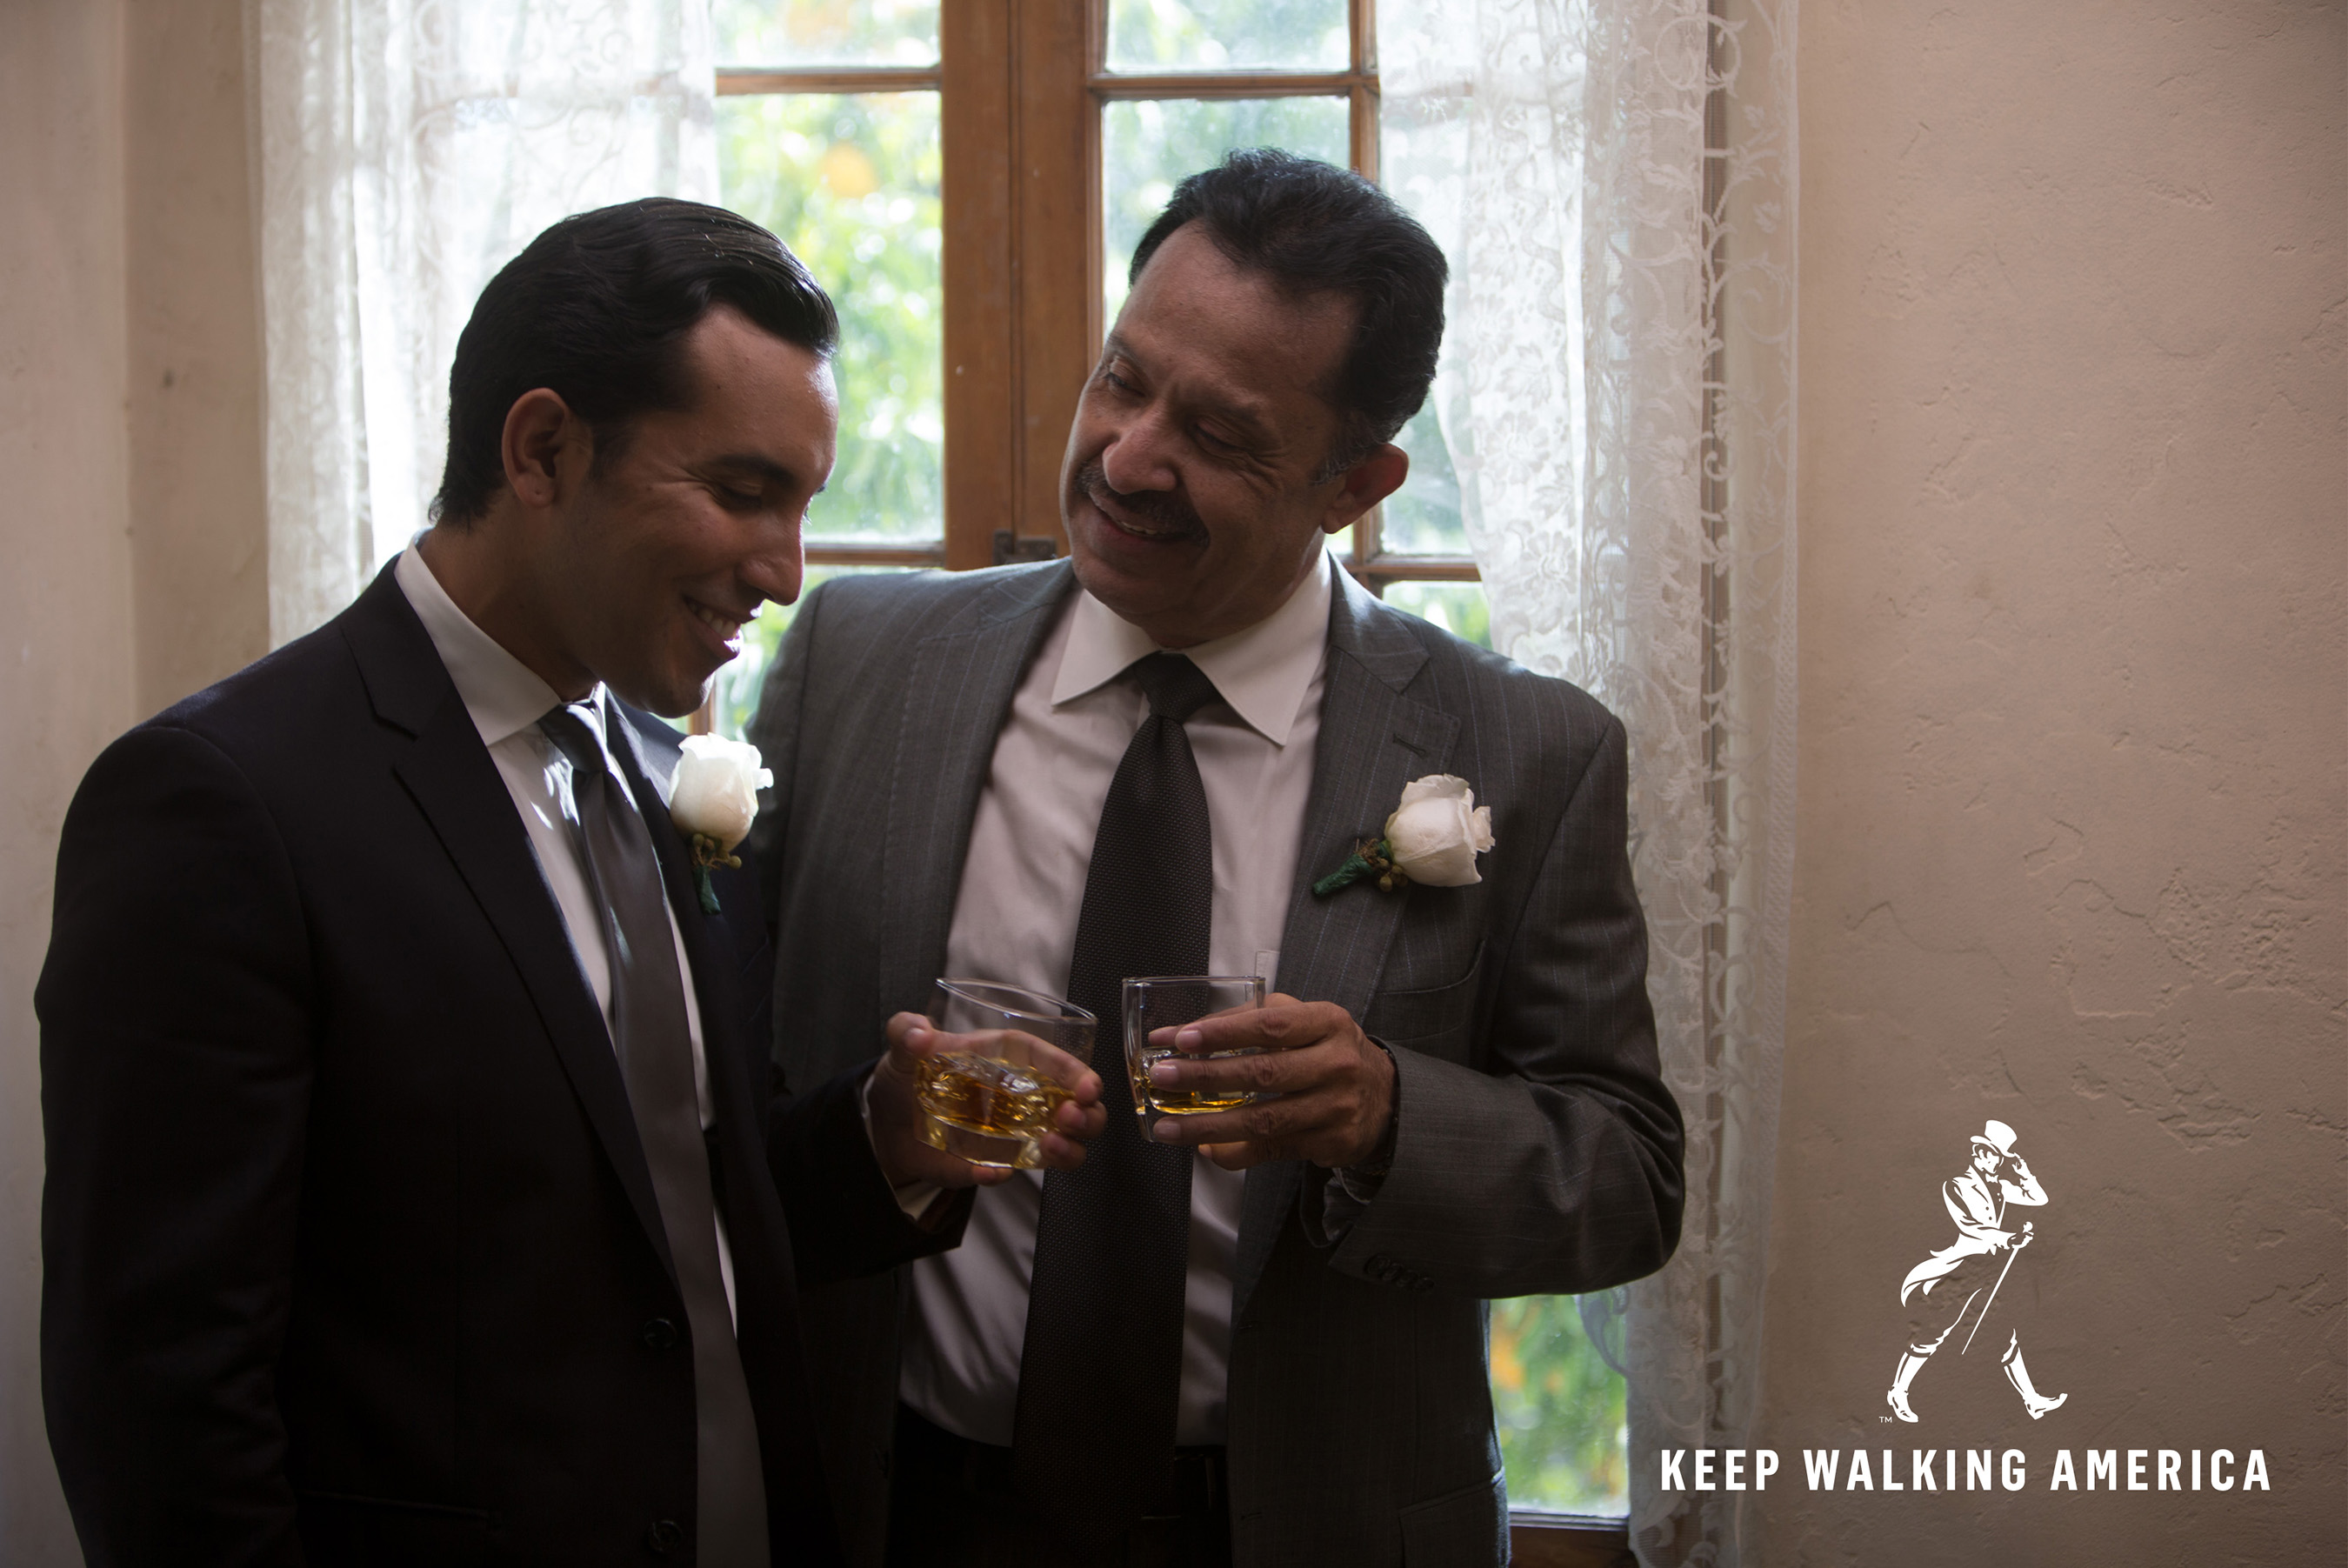 Johnnie Walker celebrates cultural progress and diversity in America with new campaign Keep Walking America (Photo: Merie Weismiller Wallace).